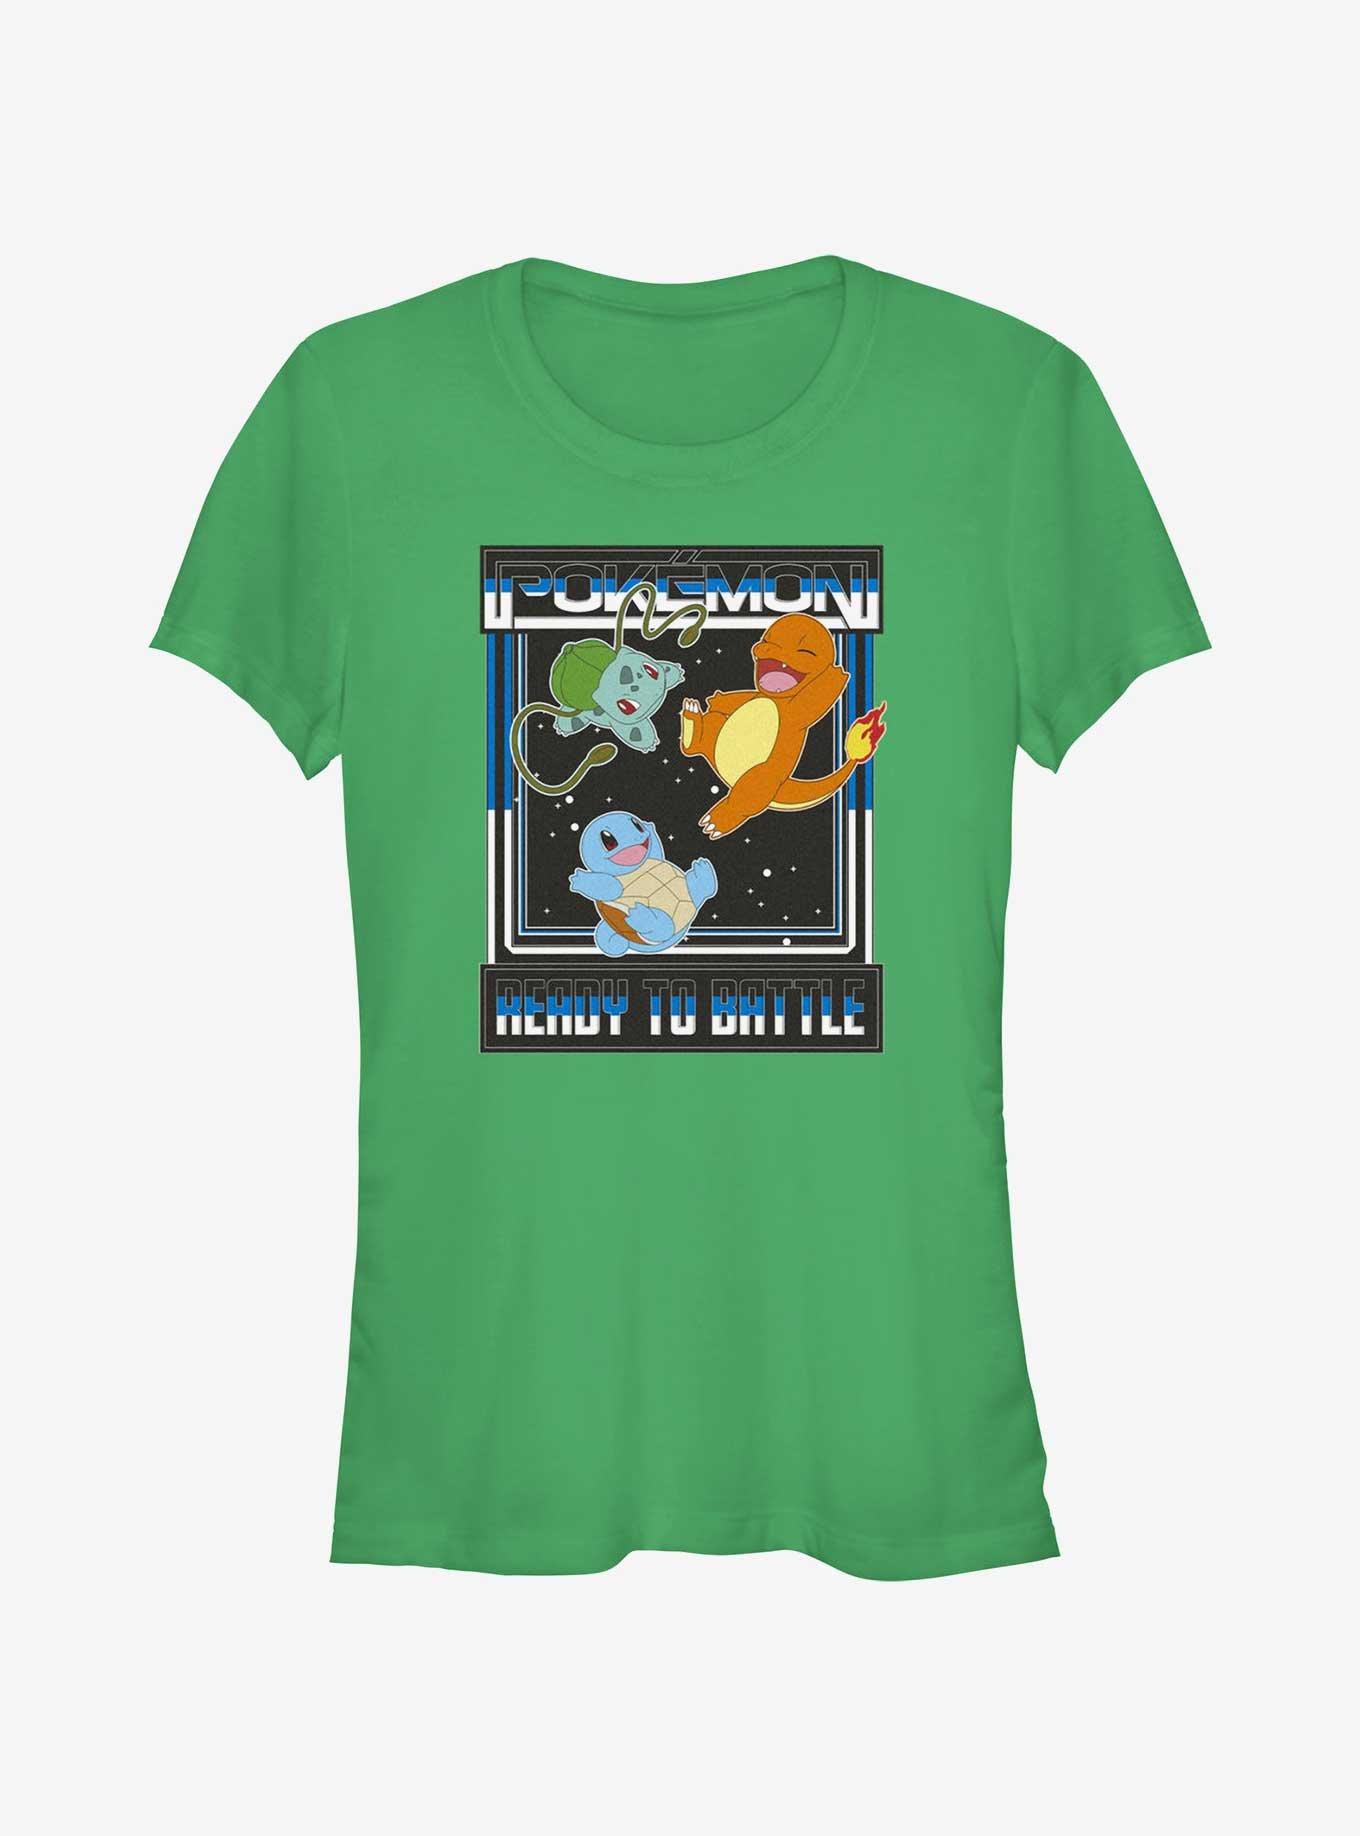 Pokemon Ready To Battle Squirtle, Bulbasaur, and Charmander Girls T-Shirt, KELLY, hi-res